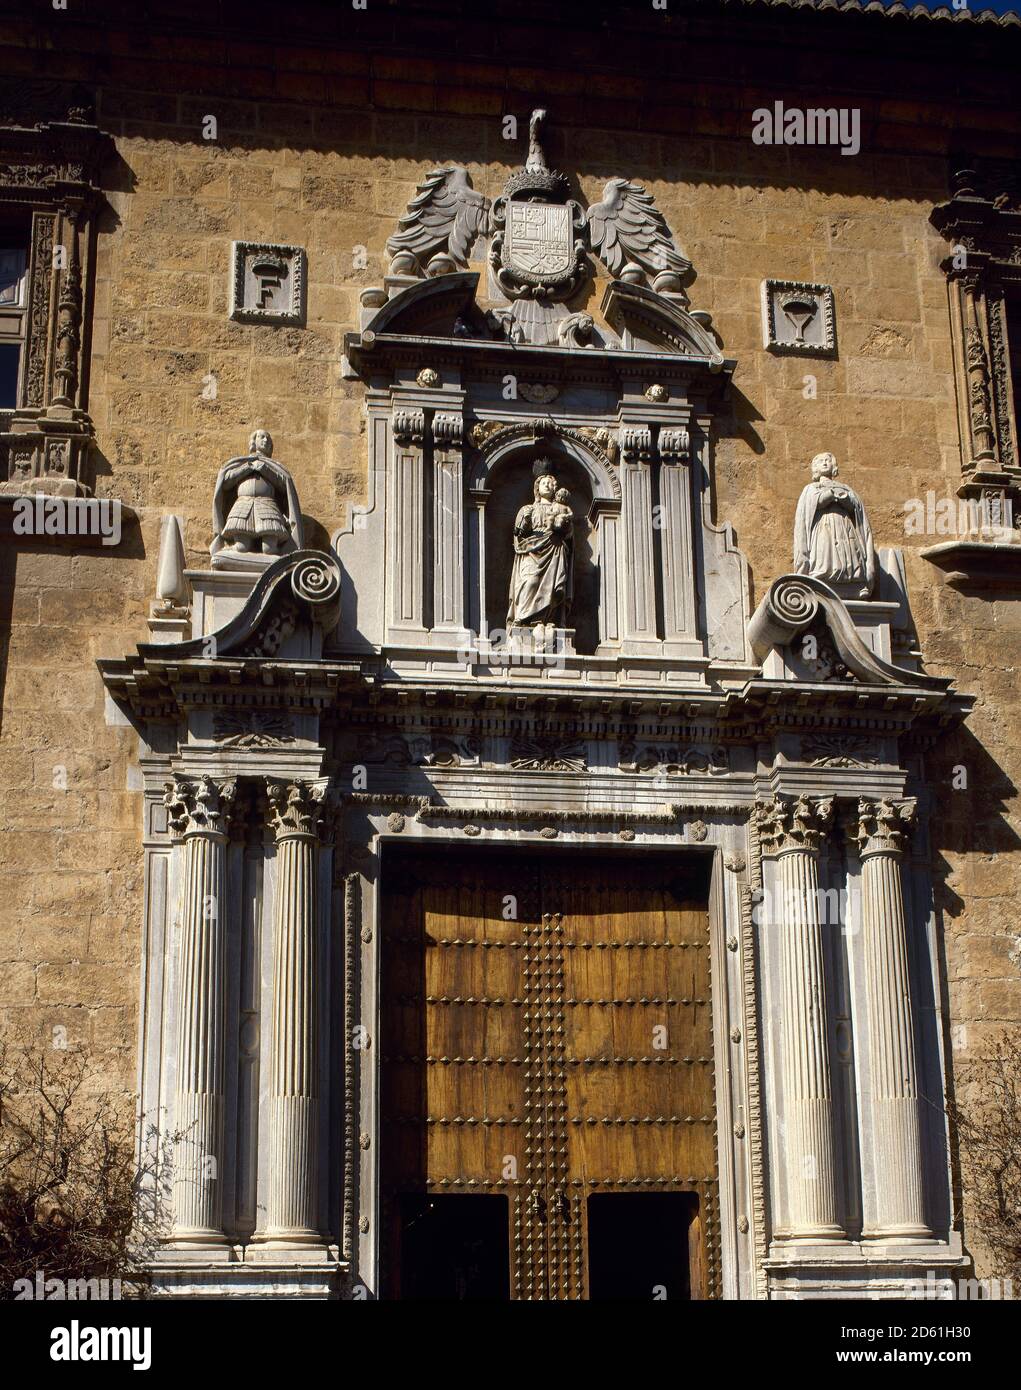 Spain, Andalusia, Granada. Royal Hospital. It was founded by the Catholic  Monarchs who comissioned the building in 1504. Designed by the architect  Enrique Egas, it was built in 1511. View of the